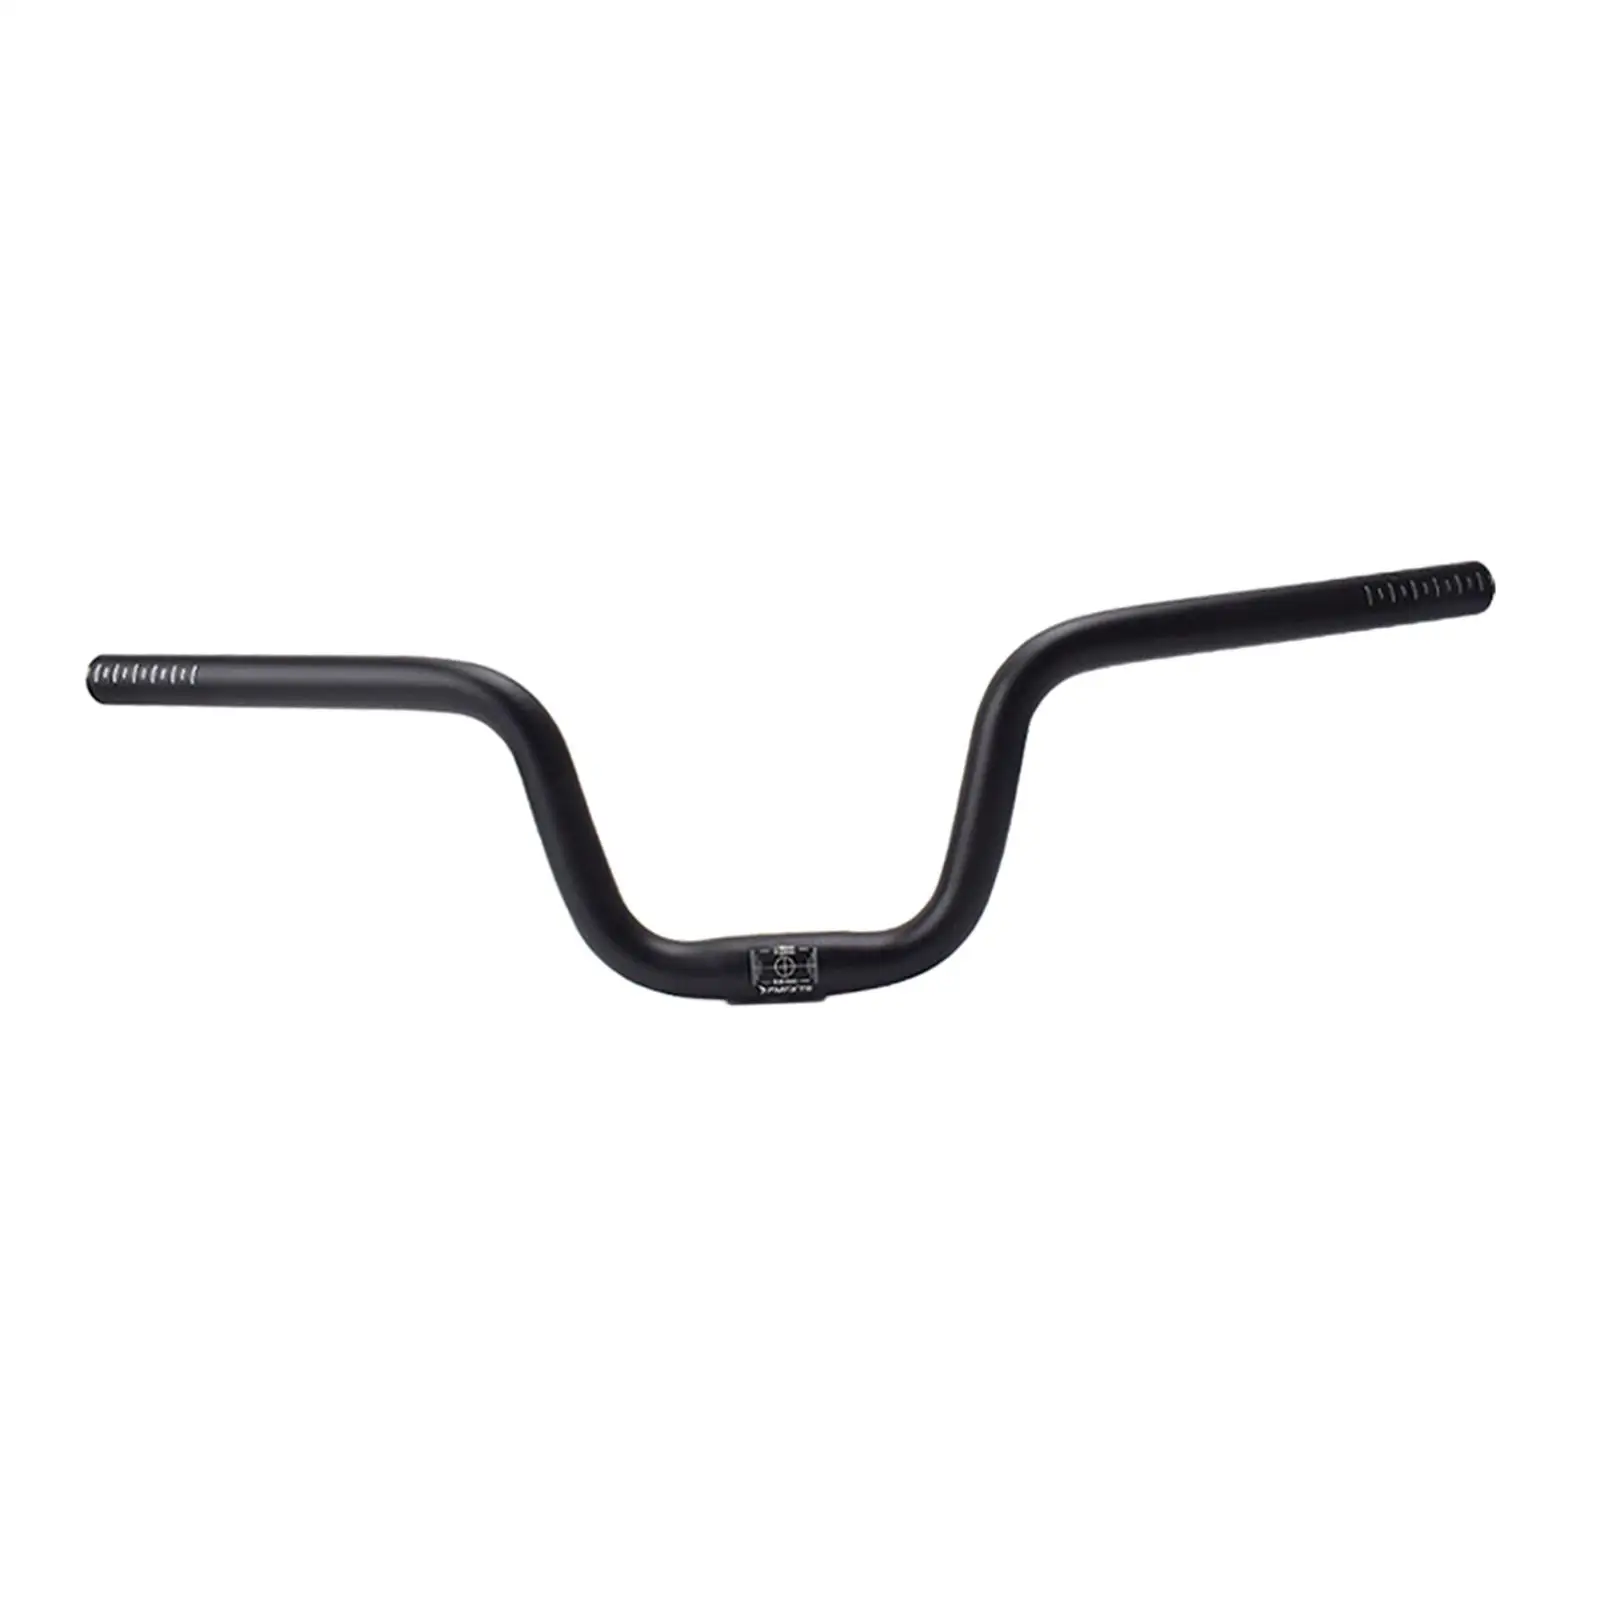 Folding Bike Handlebar Cycling Handle Bar 25.4mm Clamp Accessories 22.2mm for Road Bike BMX Outdoor Activities Riding